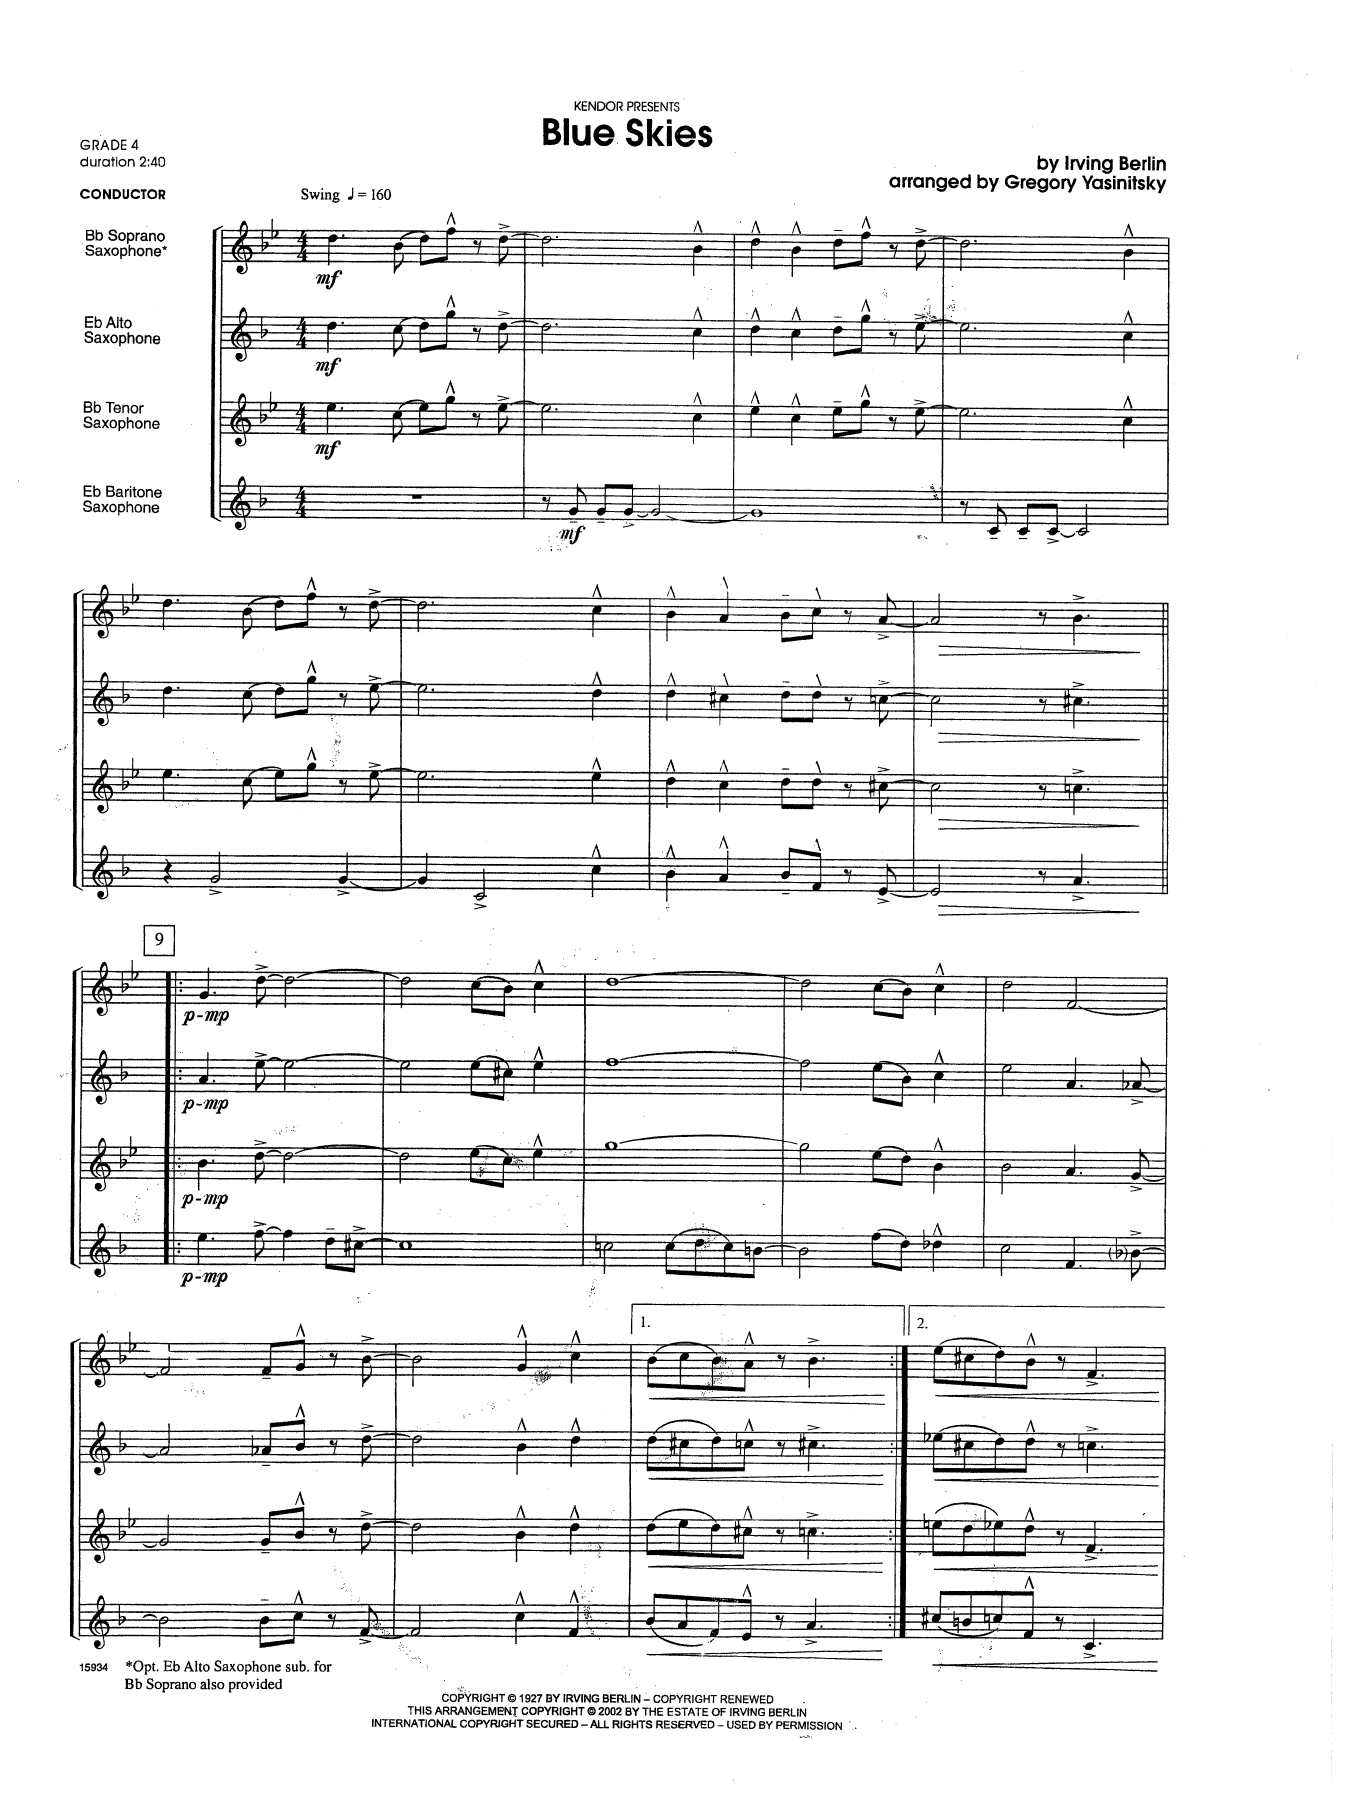 Gregory Yasinitsky Blue Skies - Full Score sheet music notes and chords. Download Printable PDF.